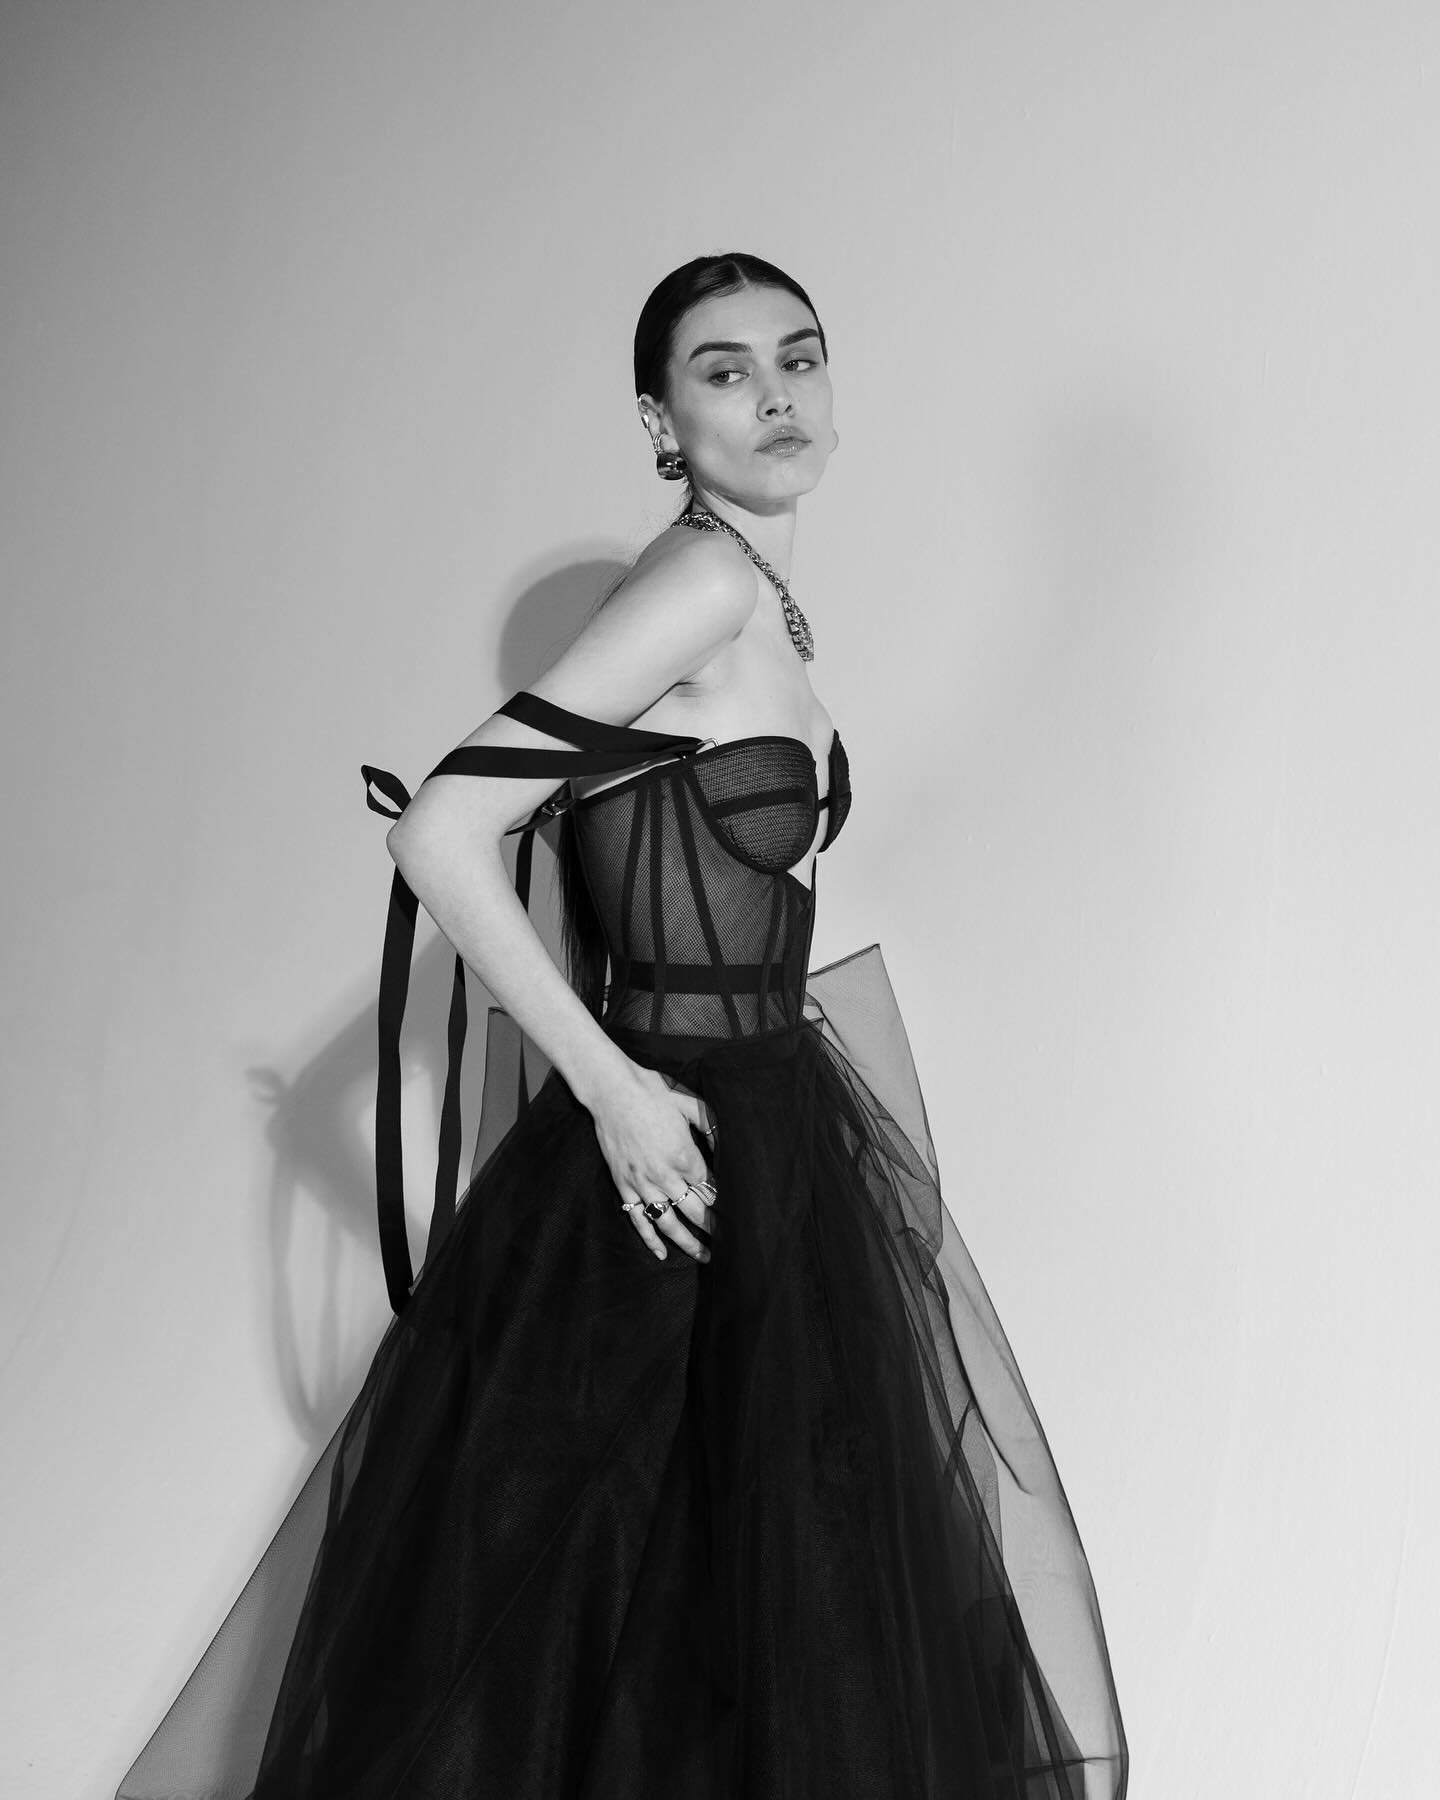 Untamed Gown

There is no light without darkness 🖤 

Ritual Unions stands for individuality and bold design. Sustainably made couture and bridal based in Berlin. Book appointment through www.ritual-unions.com | made-to-measure | 12 weeks production 